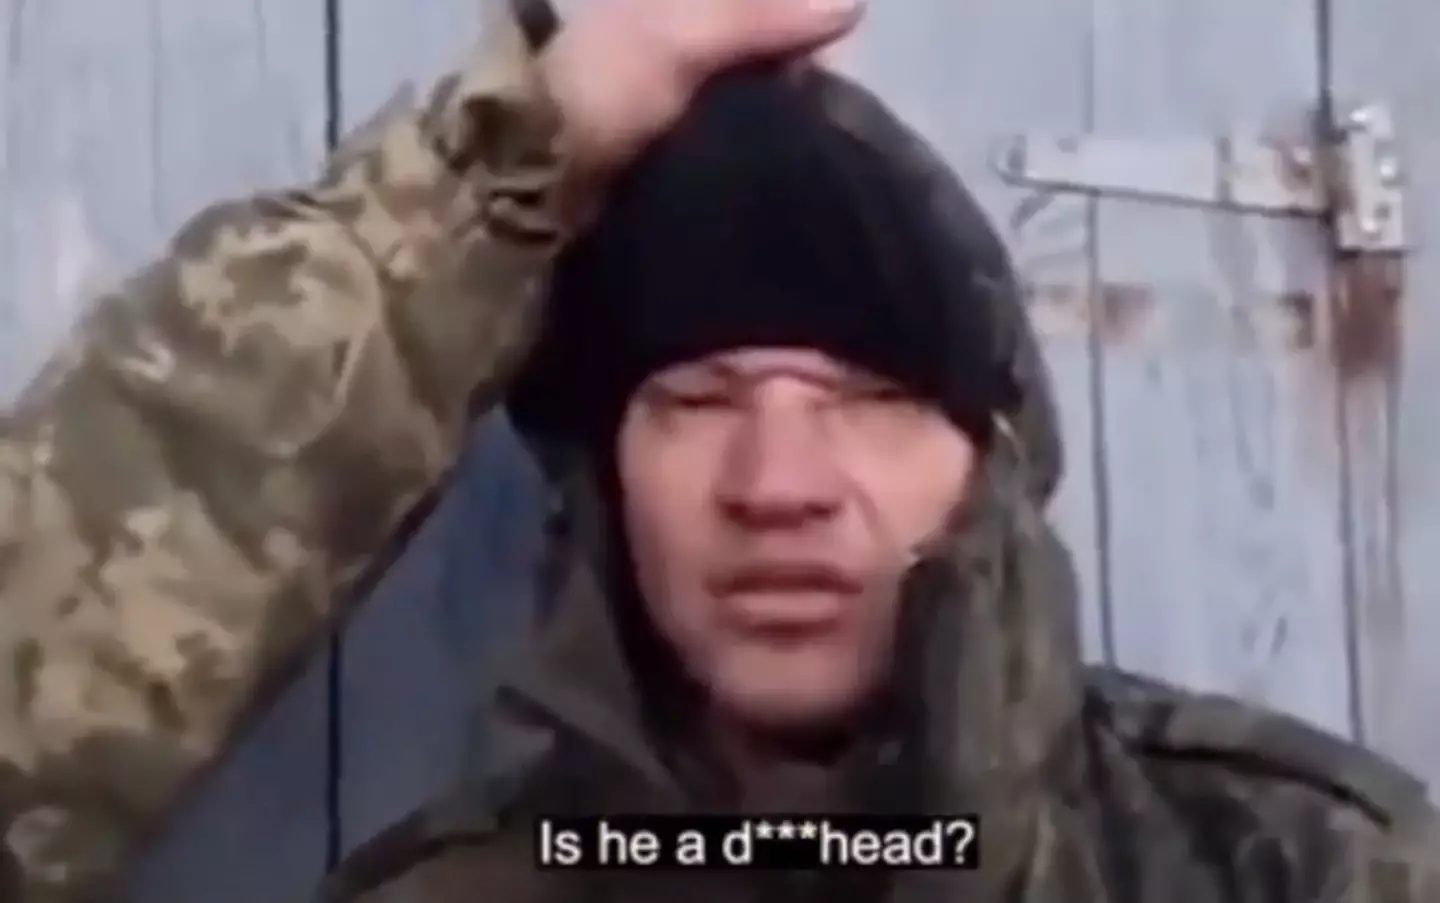 Russian soldiers were captured and made to say 'Putin is a d**khead'.